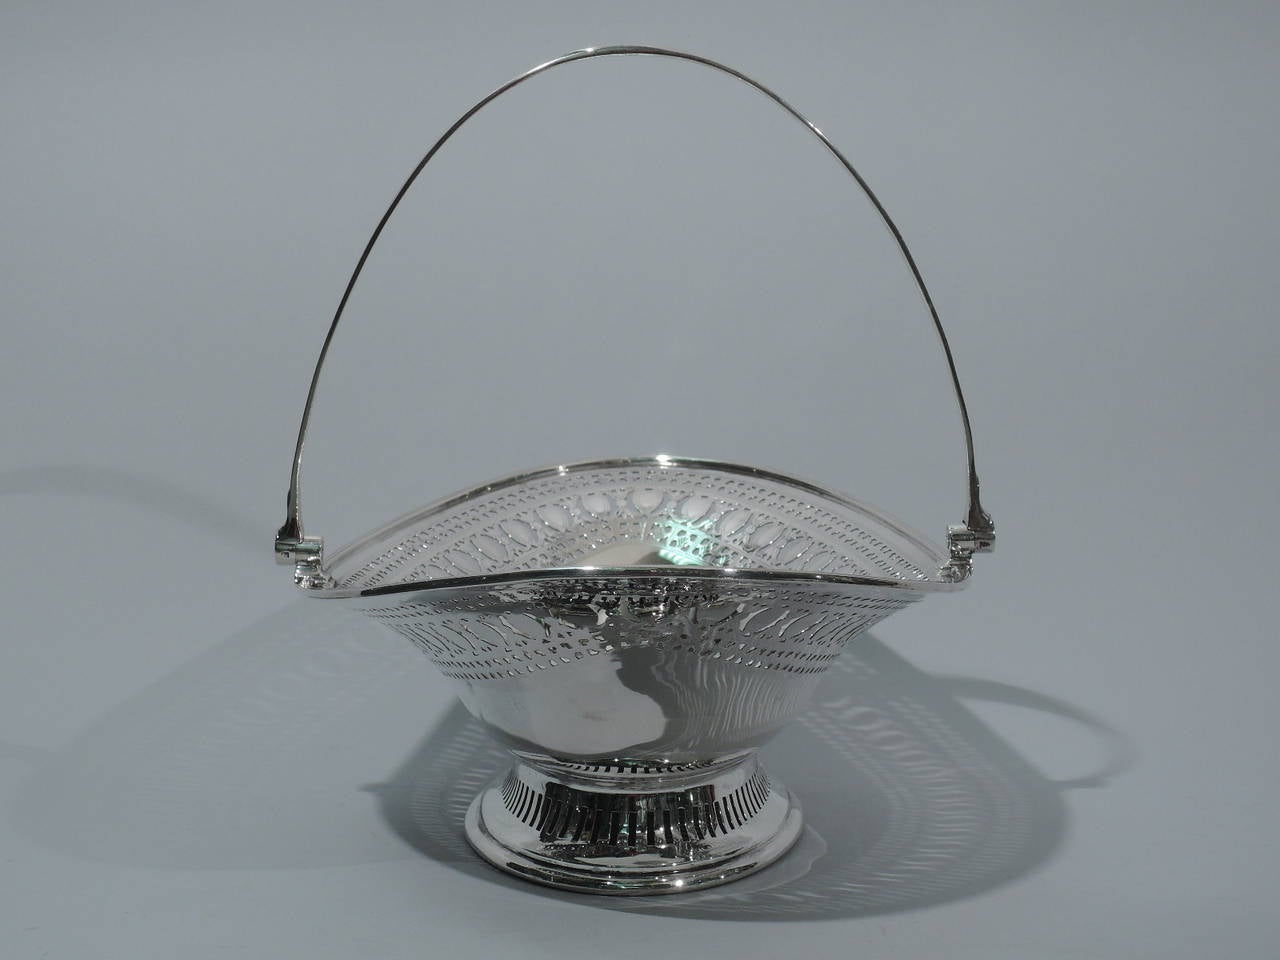 Early 20th Century Edwardian English Sterling Silver Basket 1902